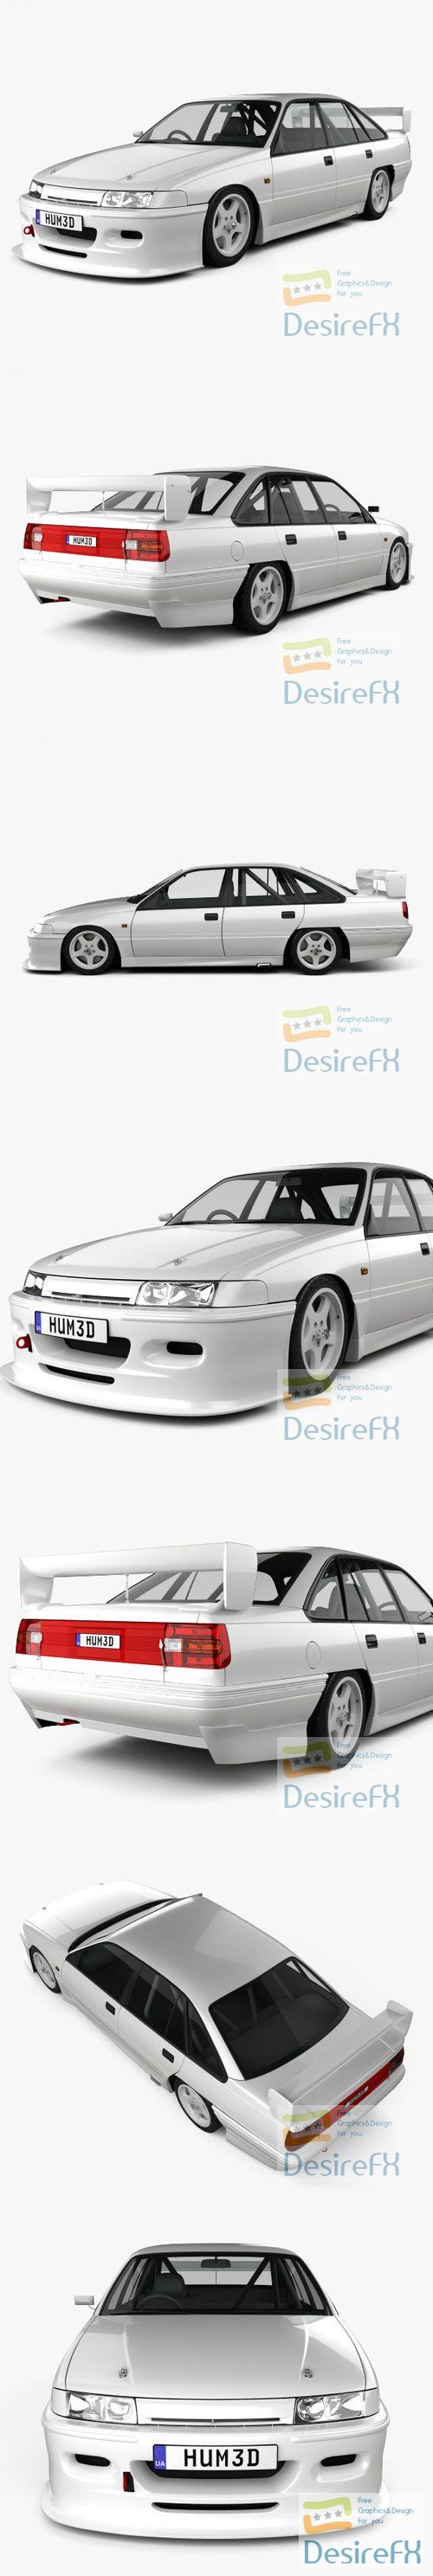 Holden Commodore Touring Car 1993 3D Model